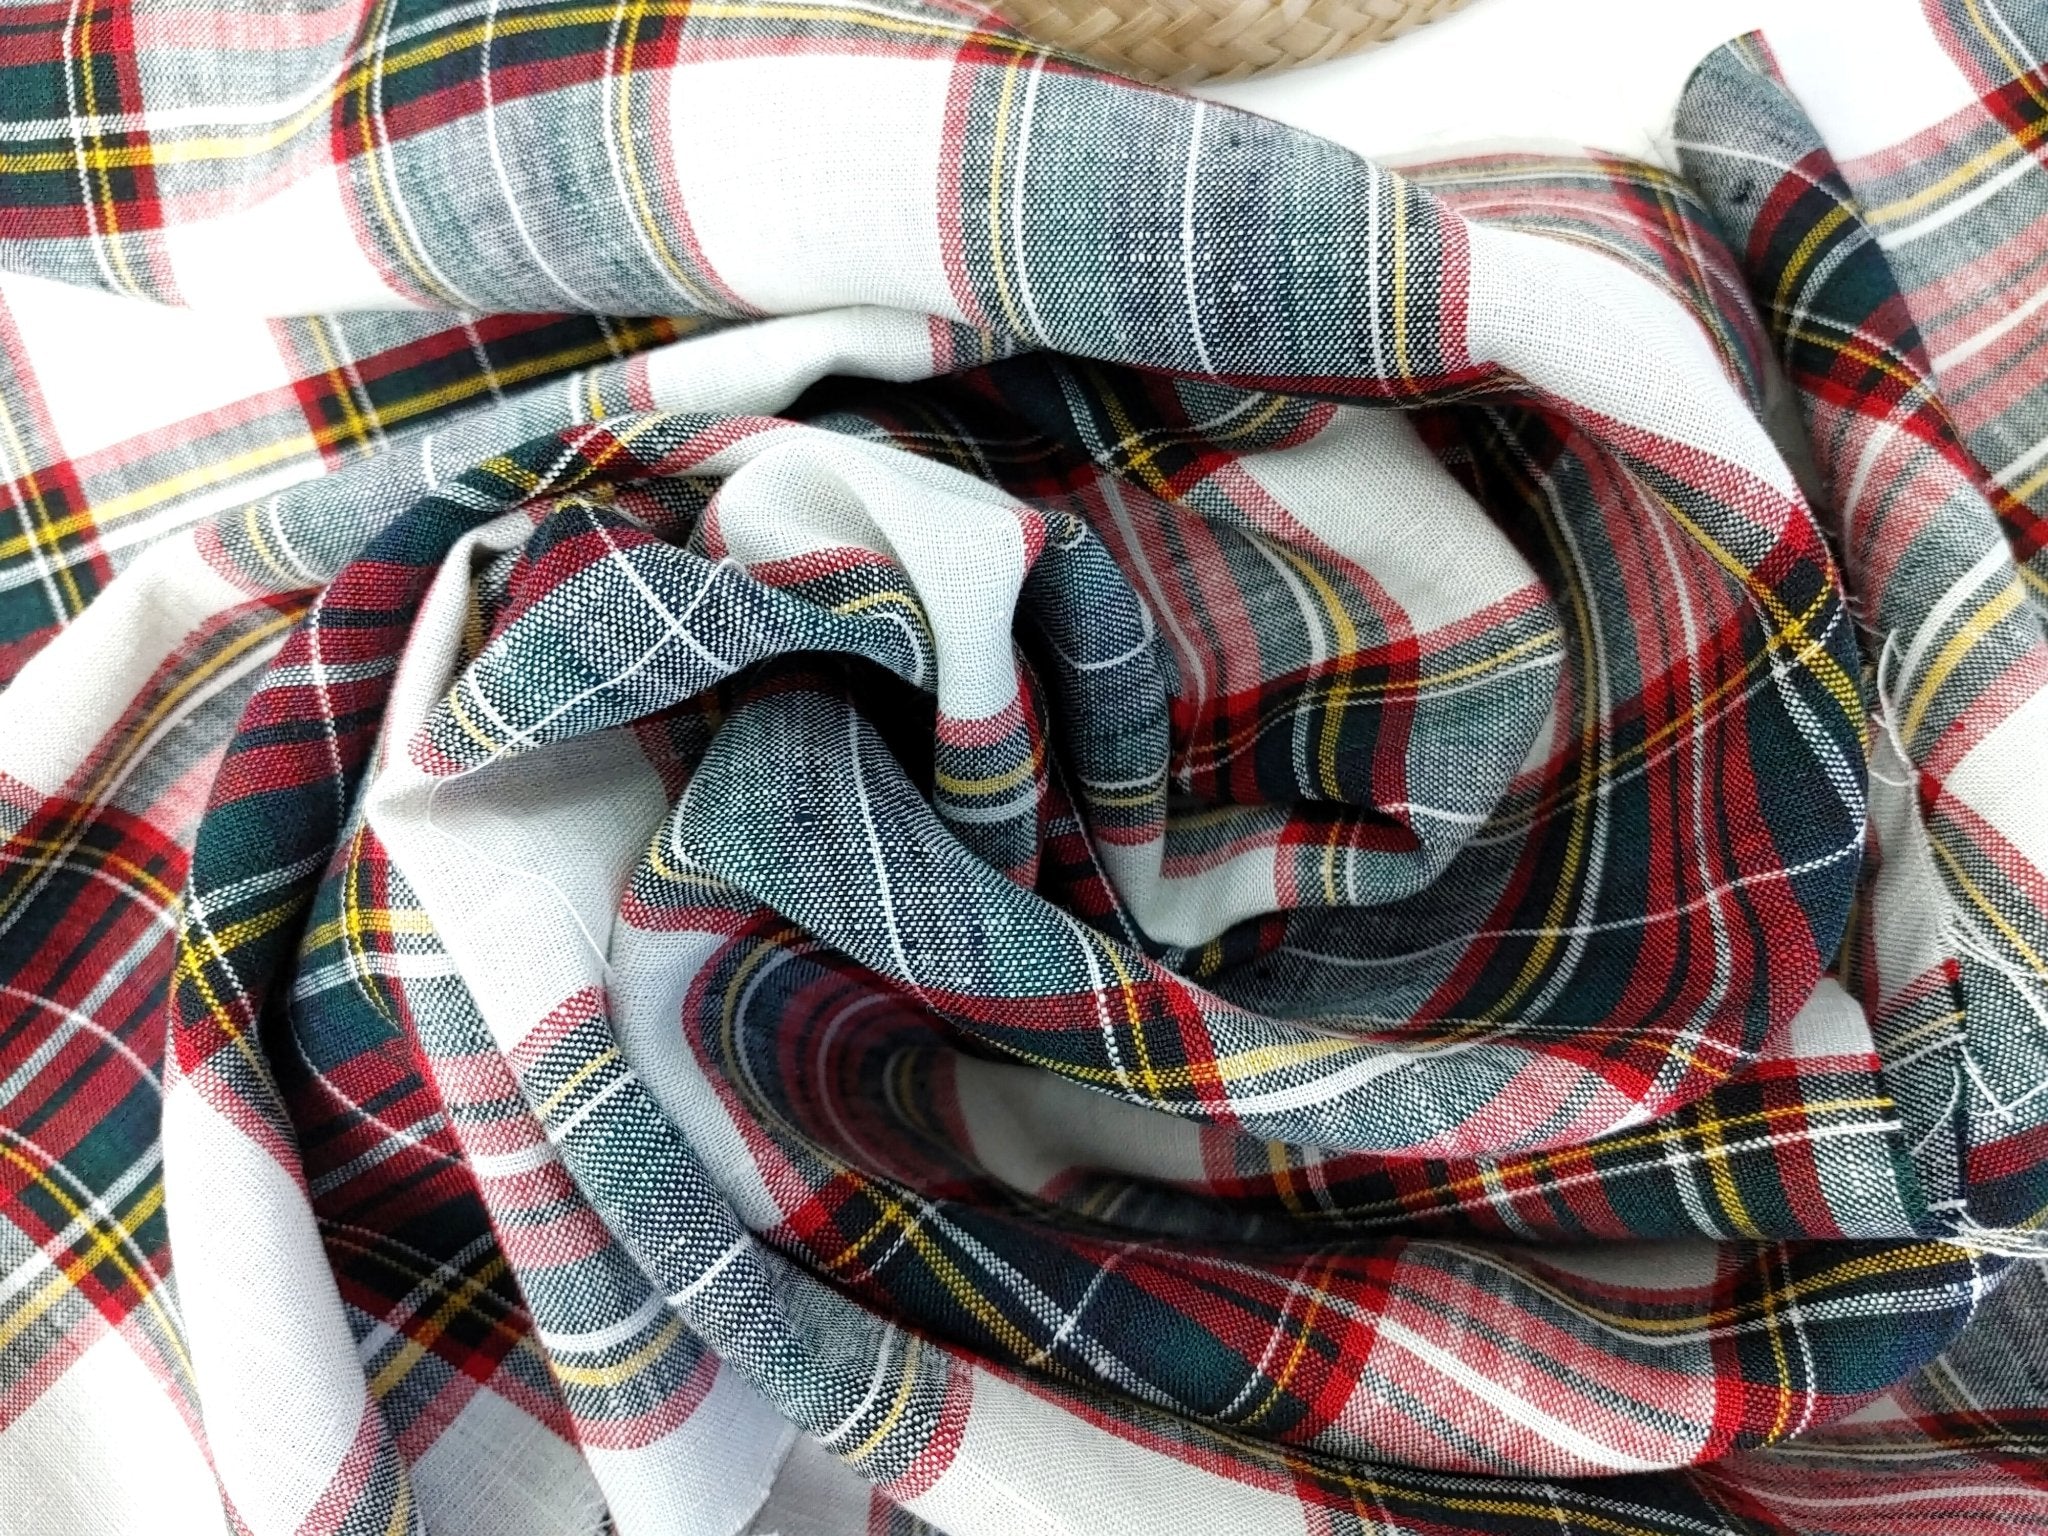 100% Linen Red Black Plaid Fabric Medium Weight 7758 - The Linen Lab - Red